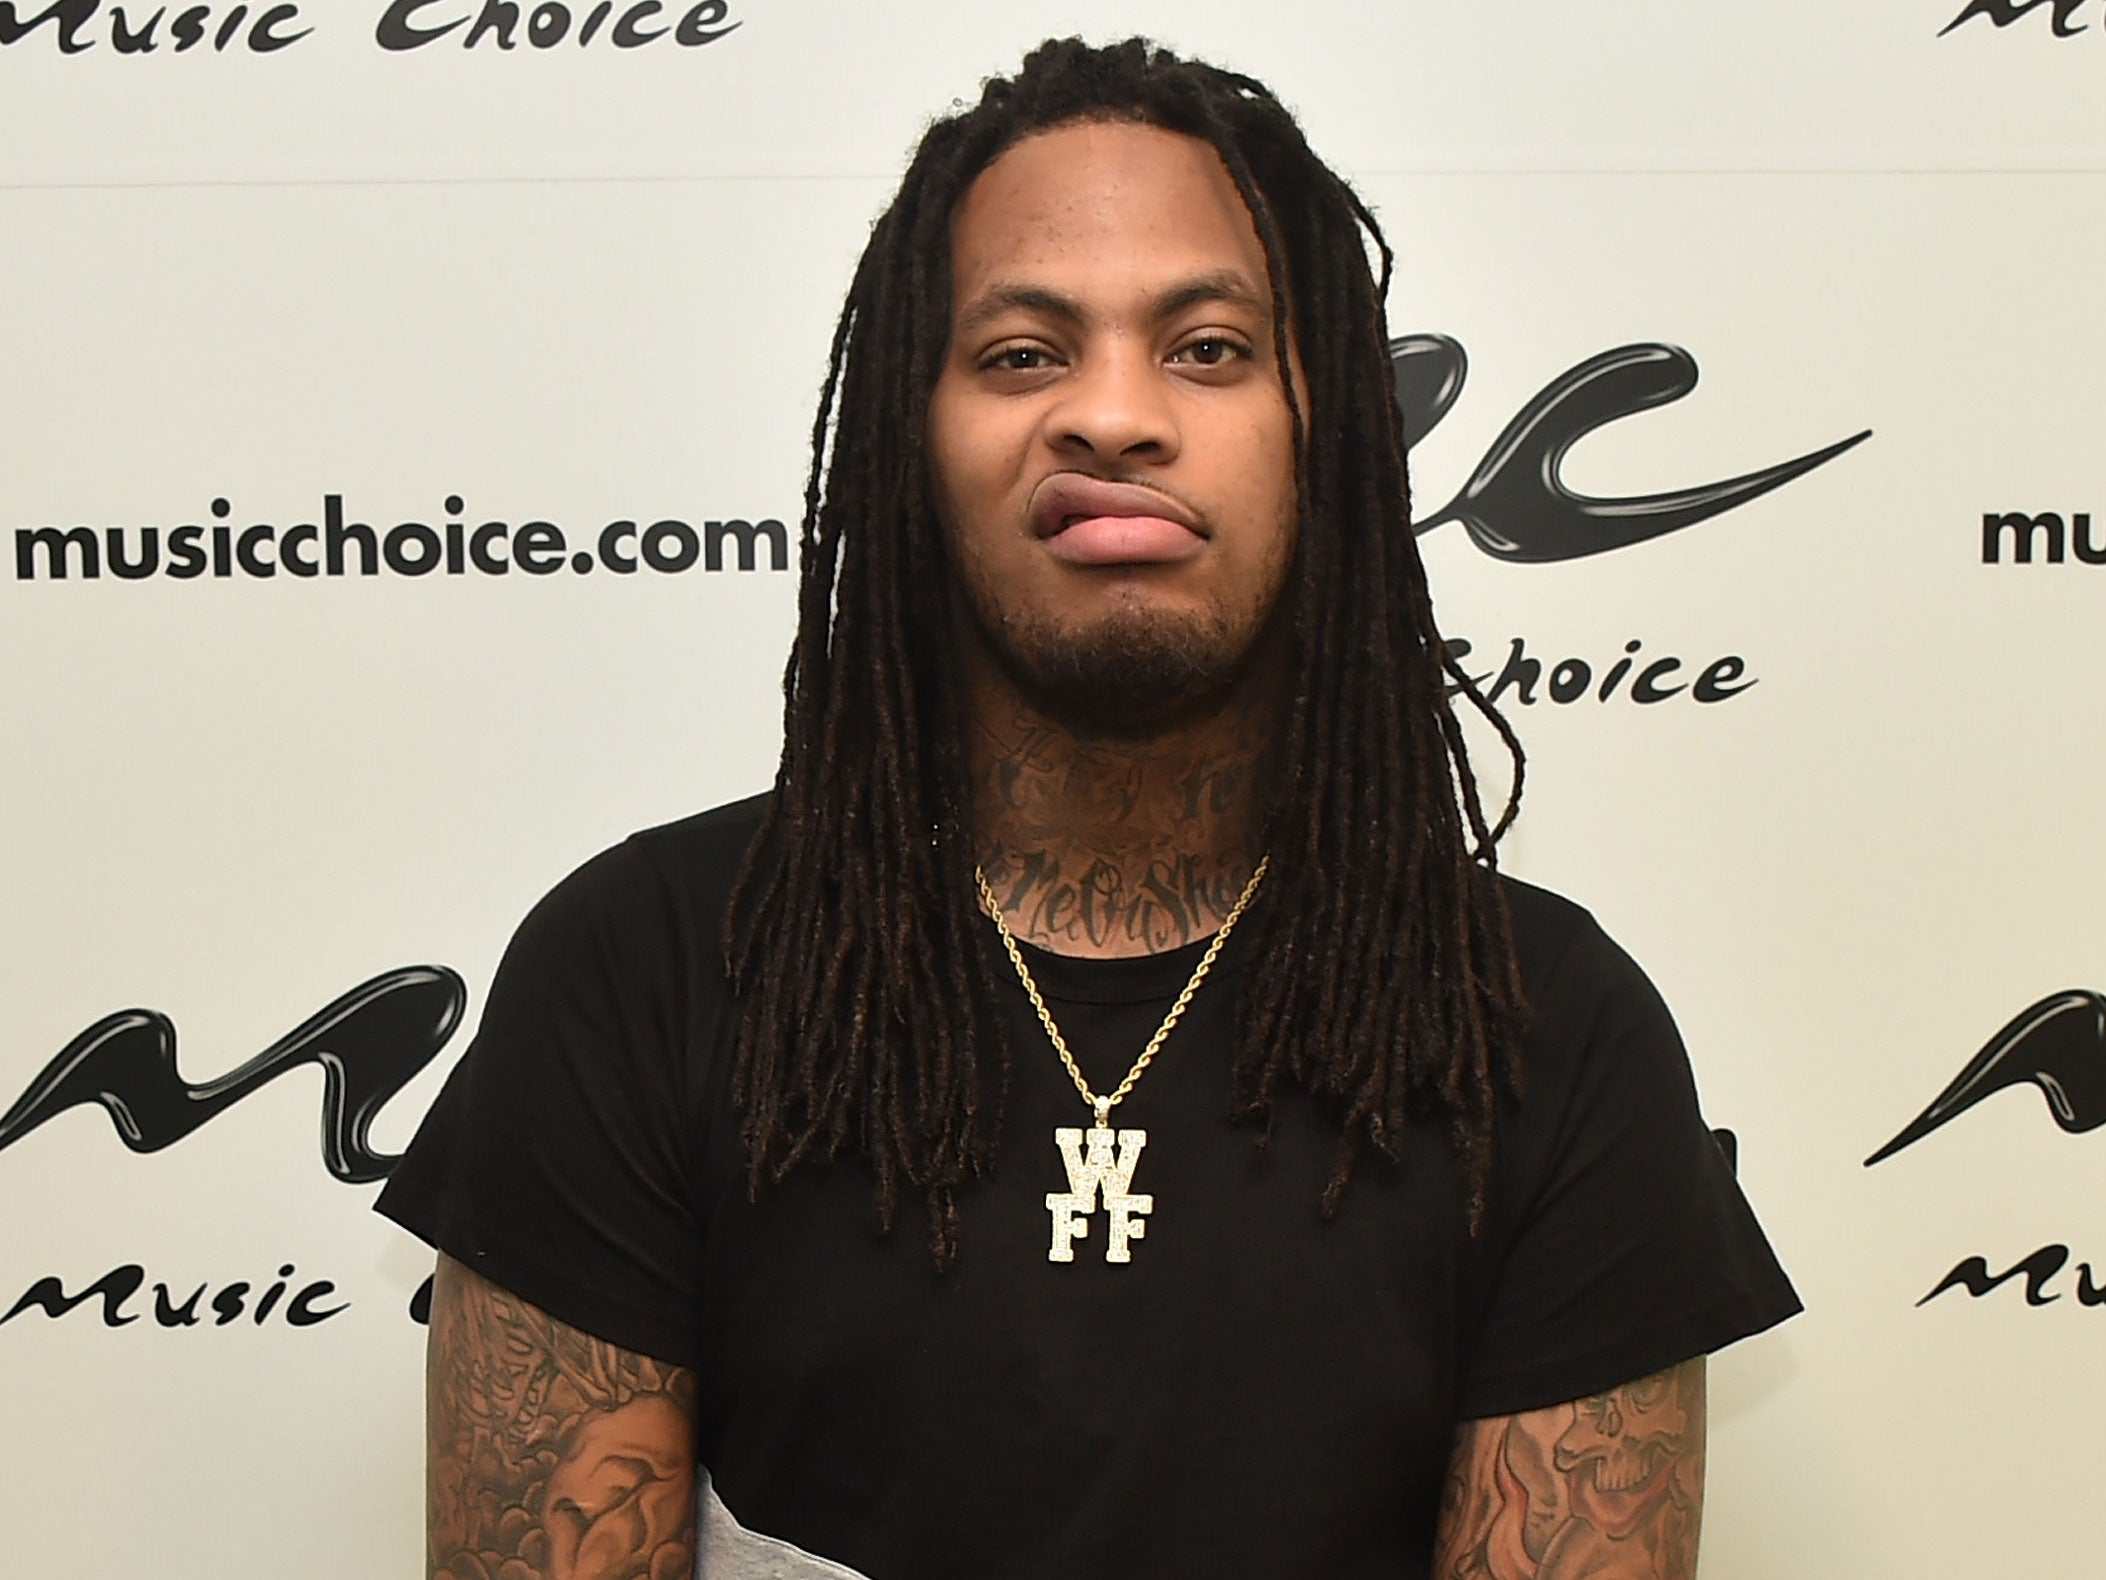 Waka Flocka Flame said that not enough emphasis was placed on the family in modern society